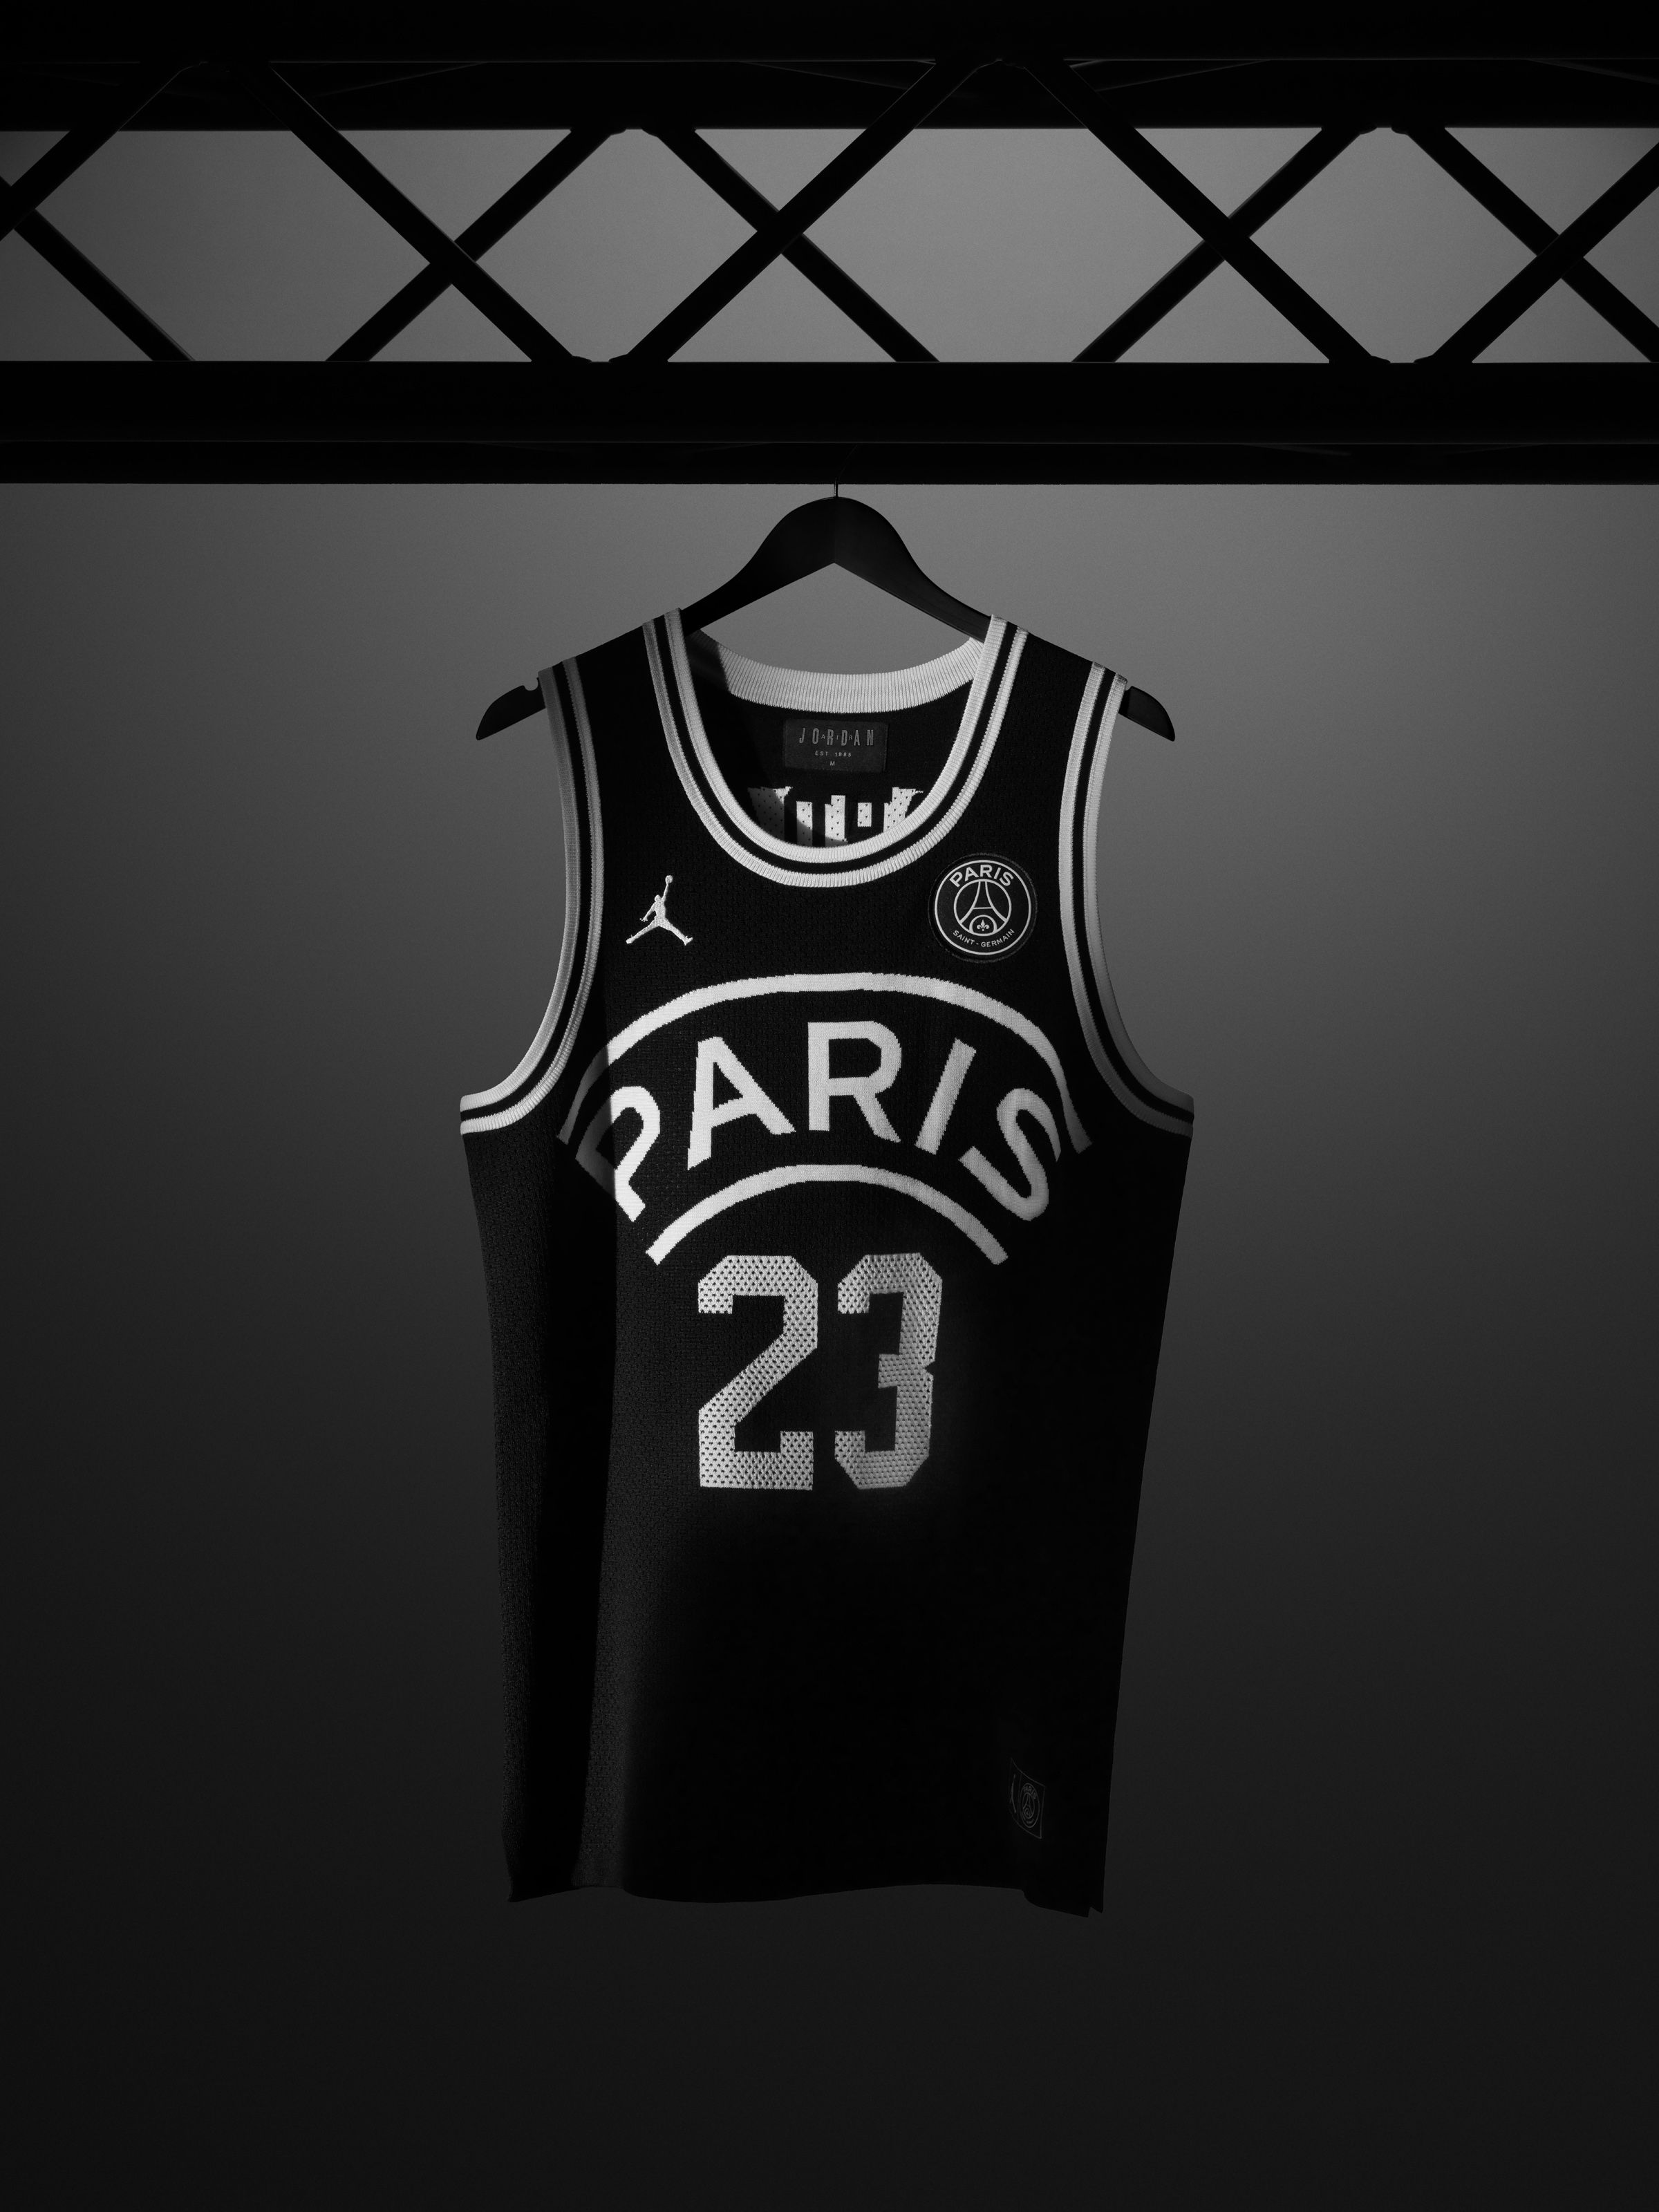 PSG unveil their new Michael Jordan themed jersey, and it is incredibly